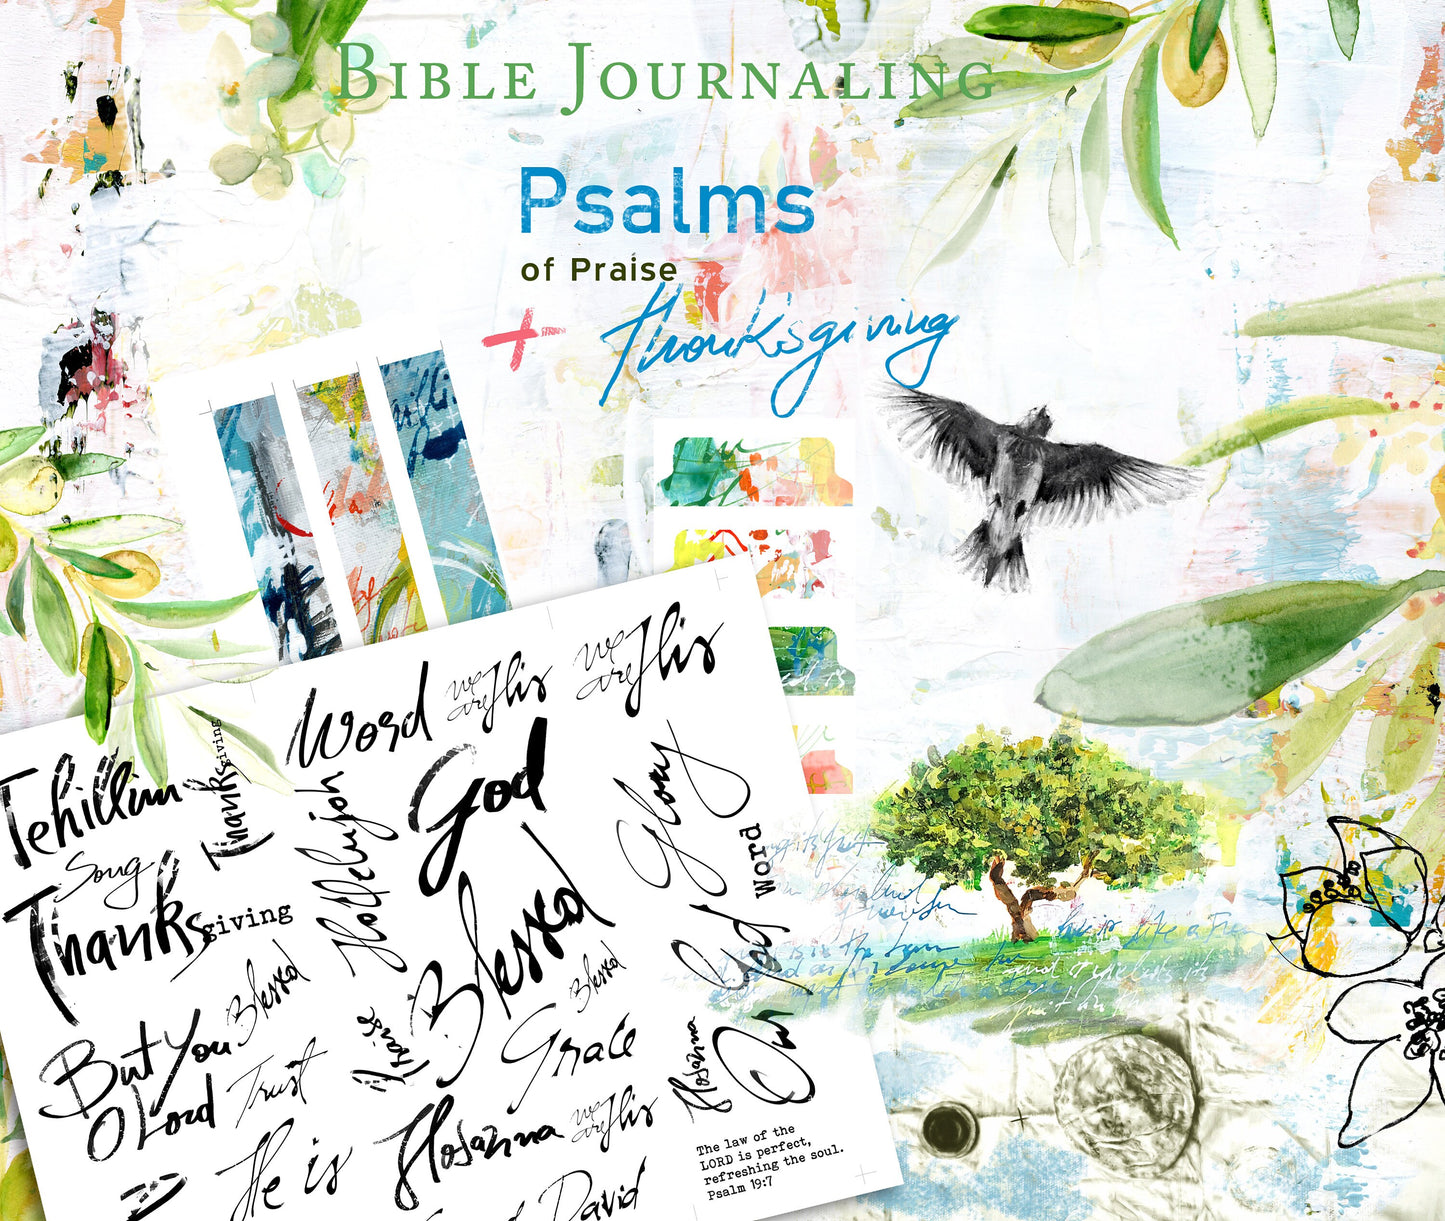 Psalms of Thanksgiving and Praise- a creative bible study, Bible journaling creative devotional - digital download